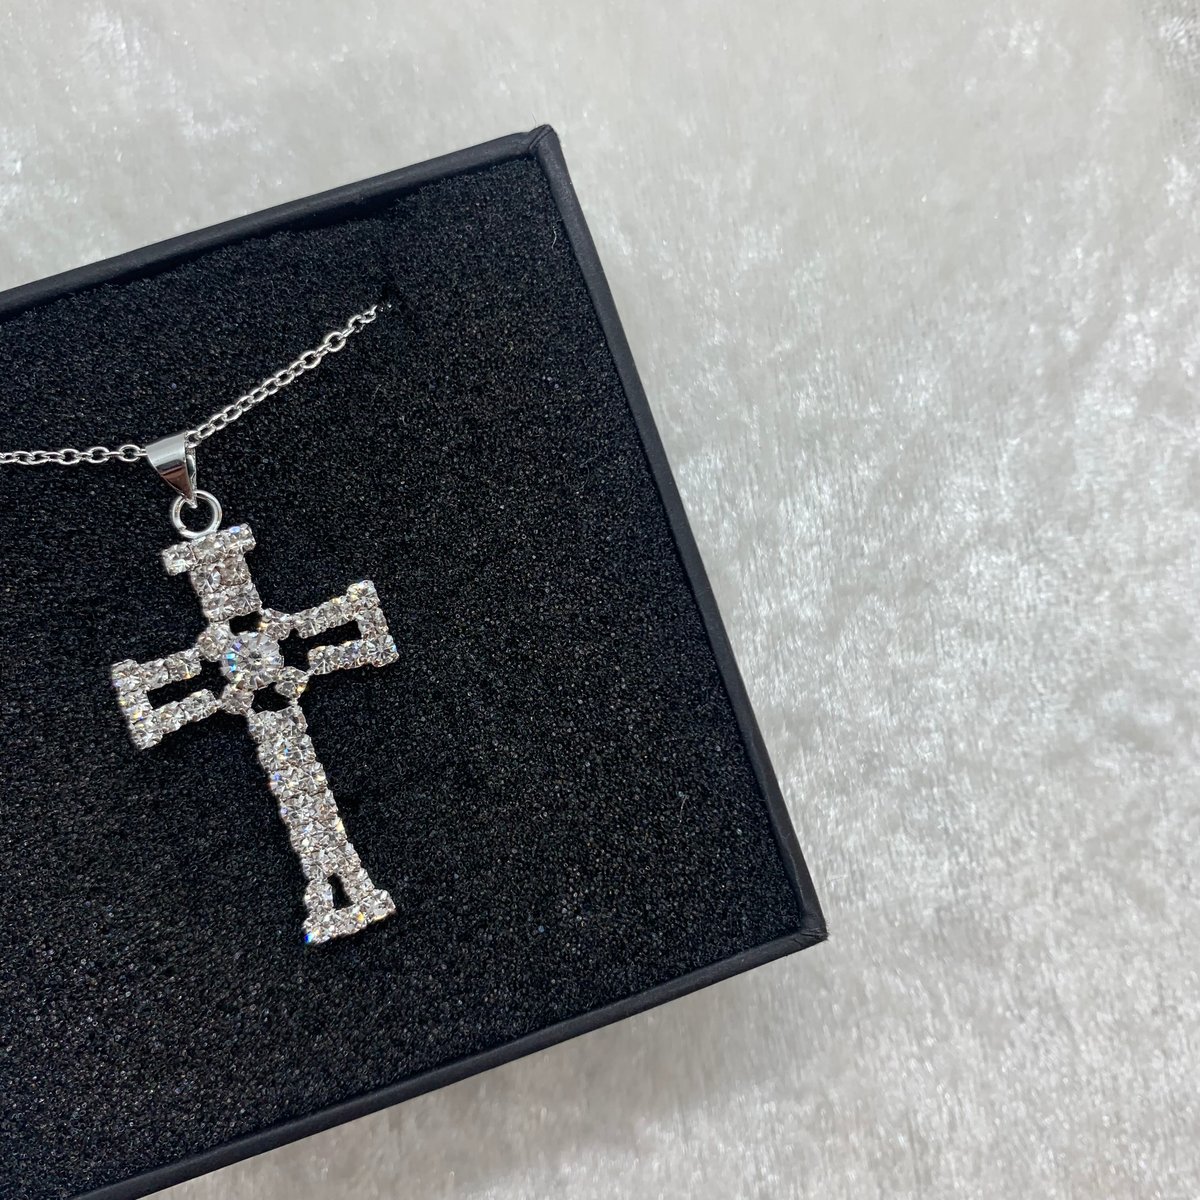 Luxe Cross Necklace